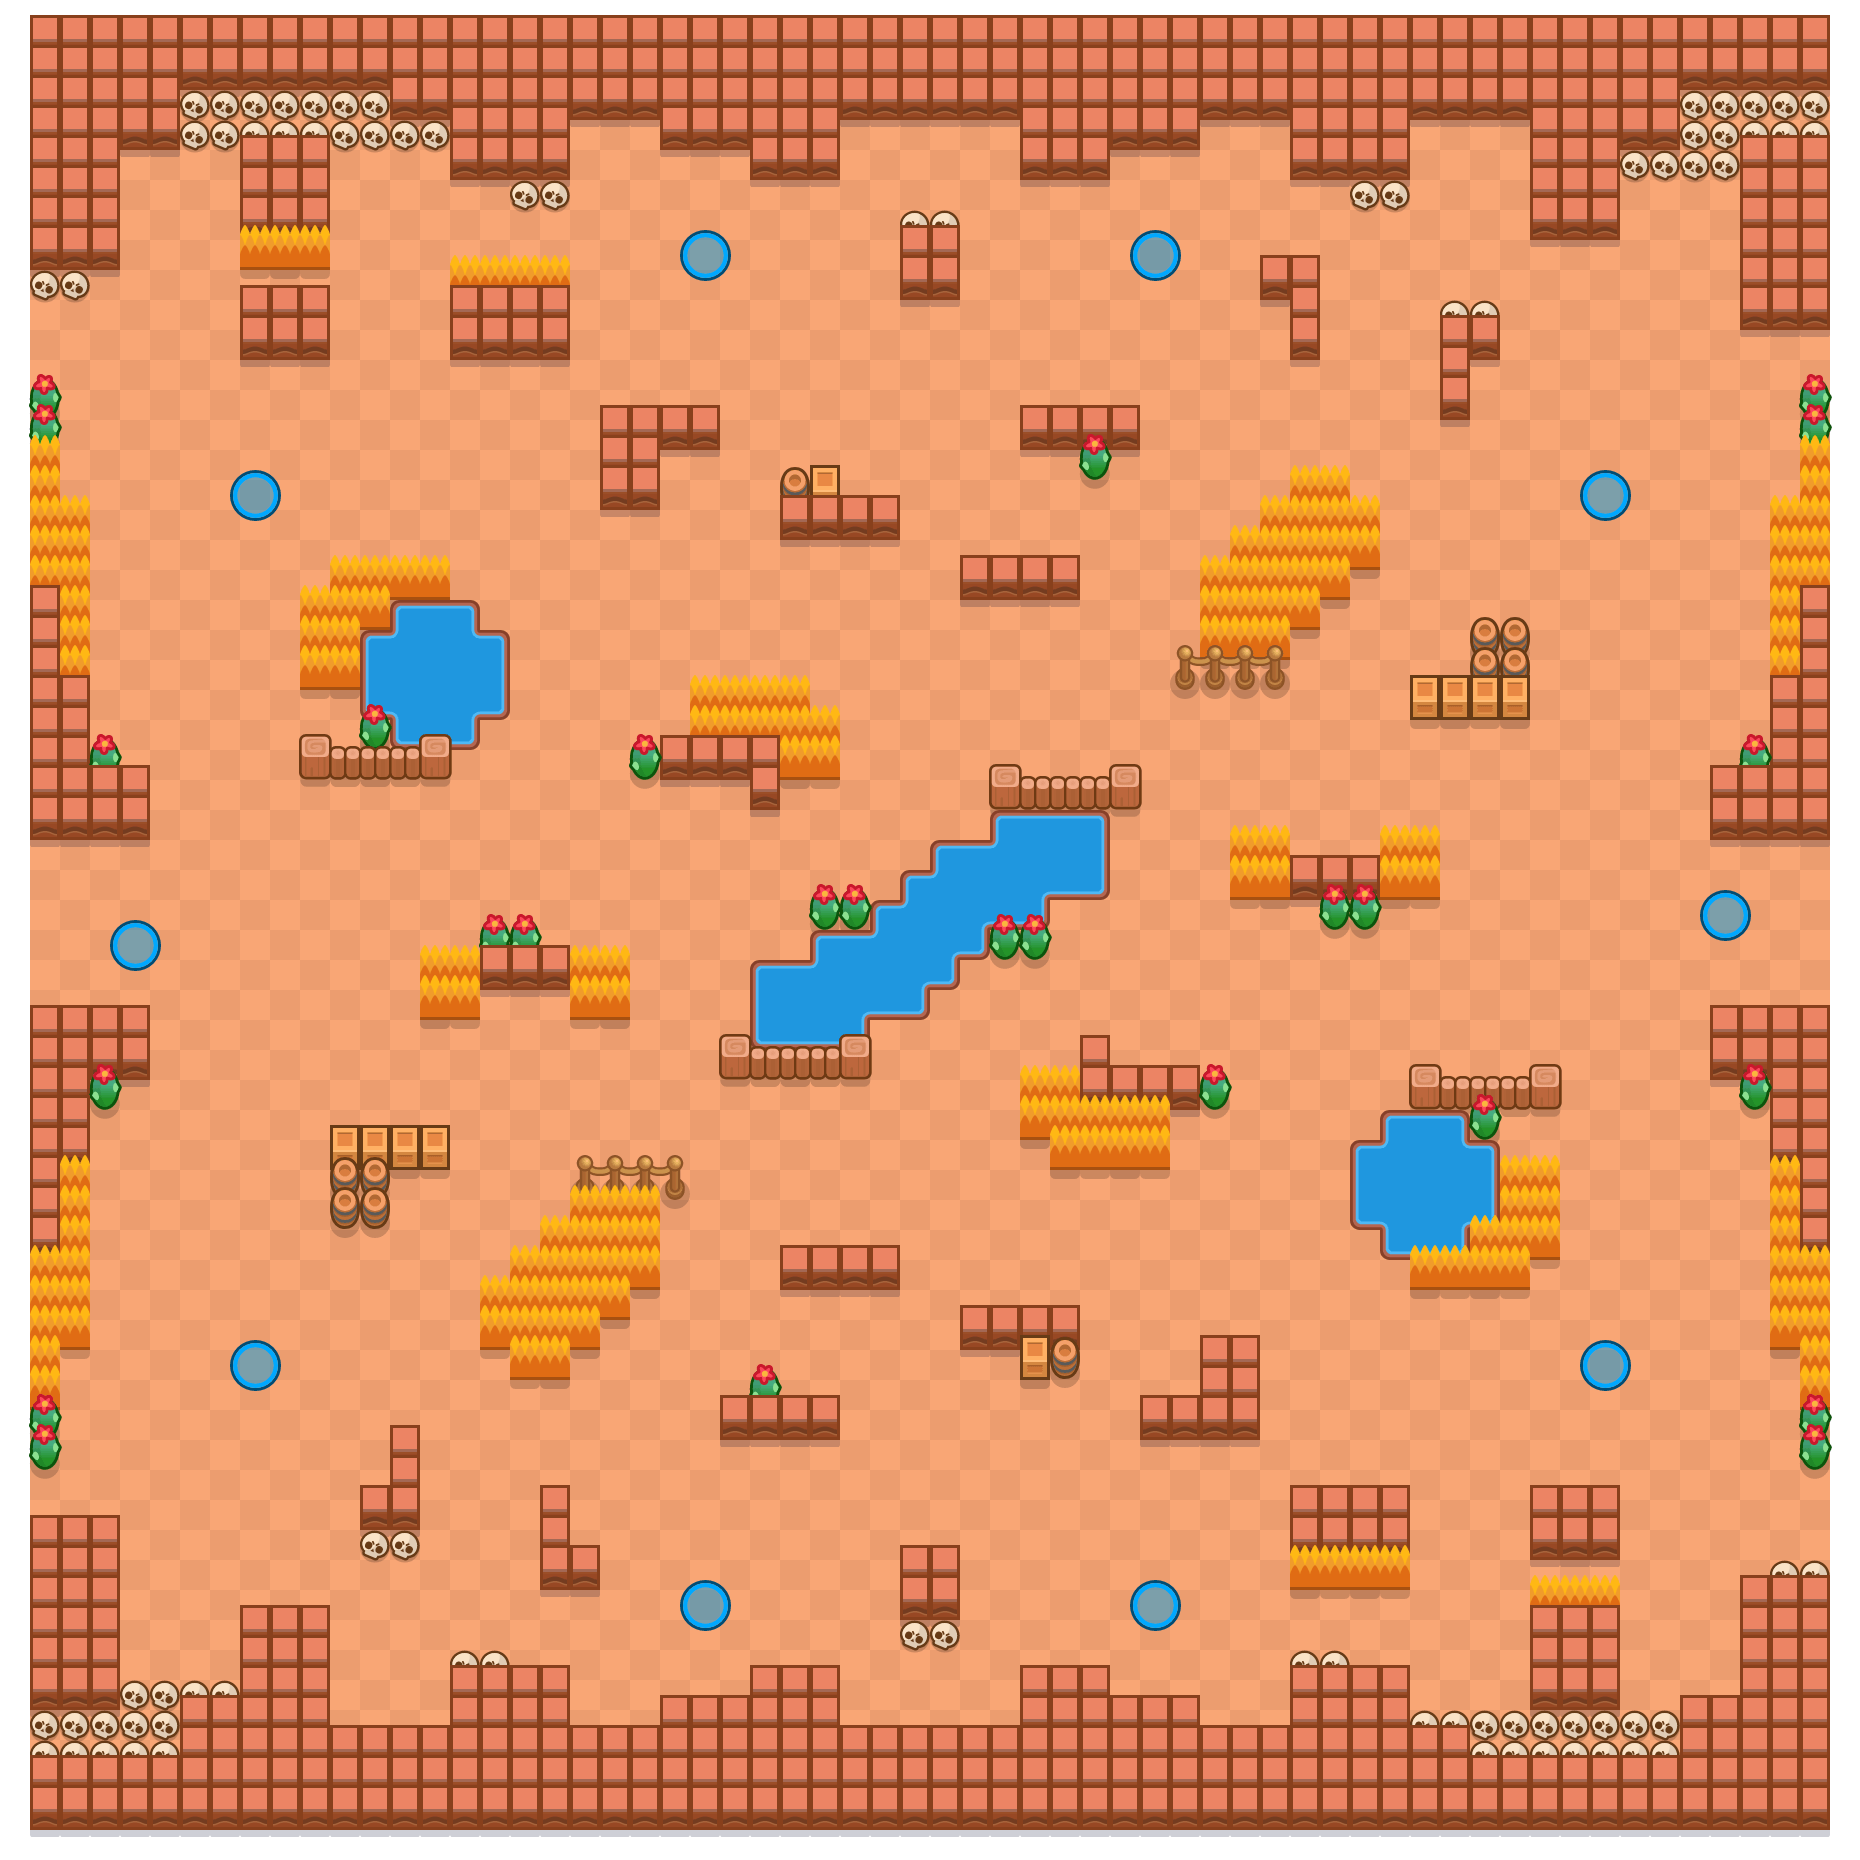 Pleiten, Pech und Pannen is a Jäger Brawl Stars map. Check out Pleiten, Pech und Pannen's map picture for Jäger and the best and recommended brawlers in Brawl Stars.